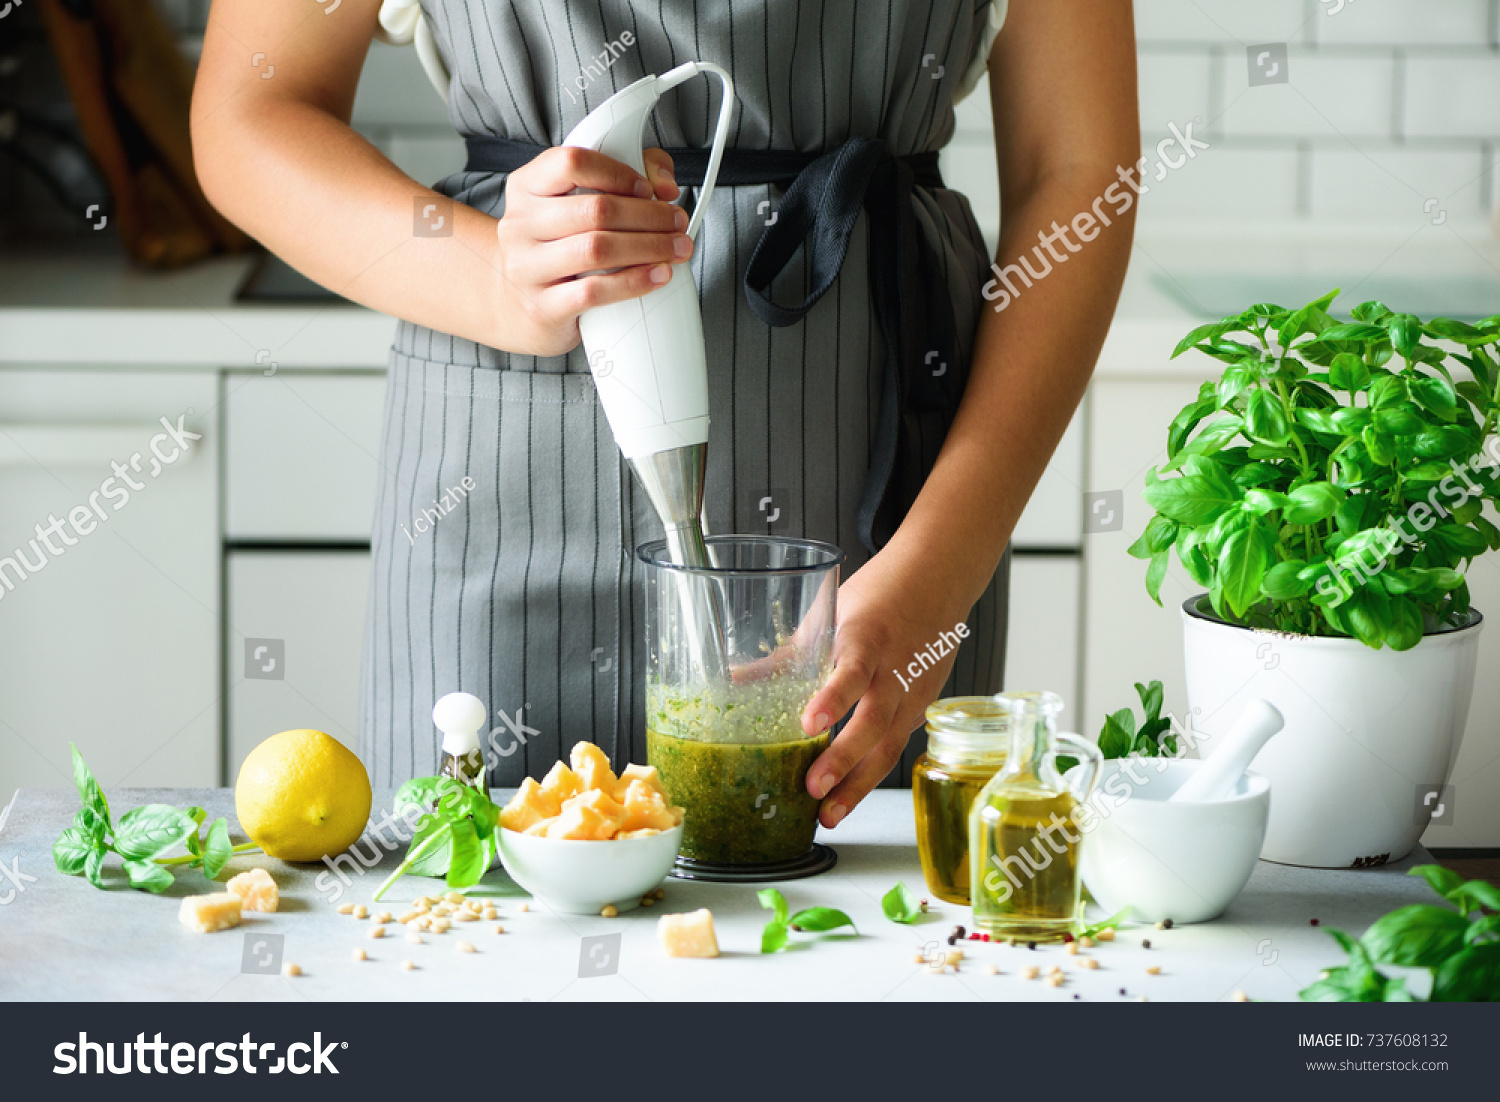 Woman using hand blender to make pesto. White kitchen interior design. Copy space. Vegetarian, clean eating lifestyle concept #737608132